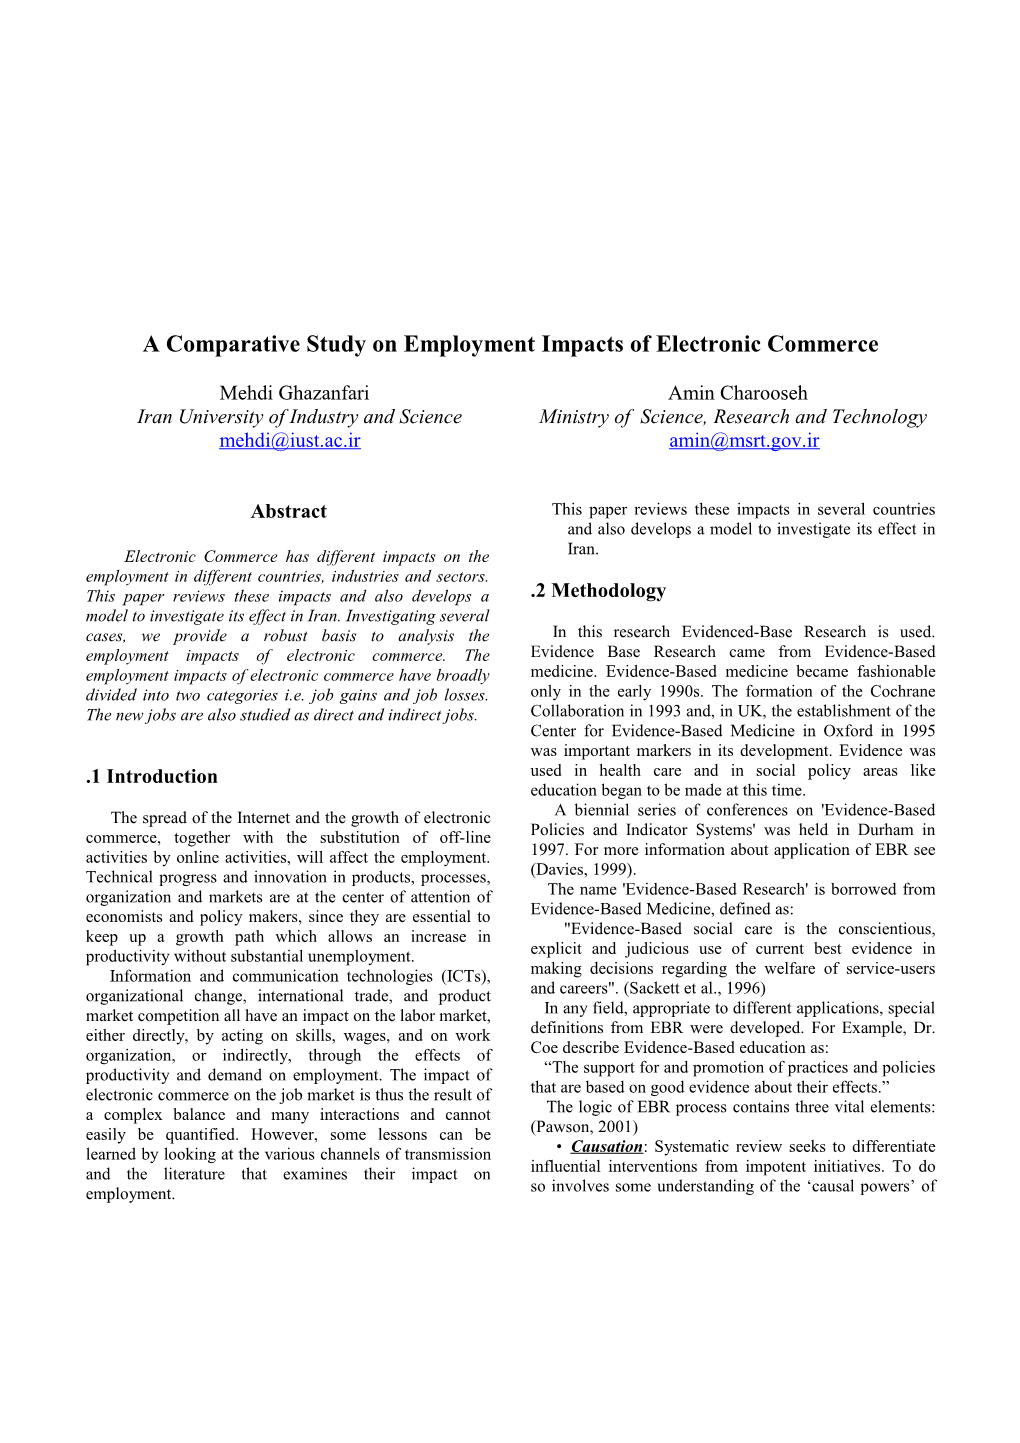 A Comparative Study on Employment Impacts of Electronic Commerce